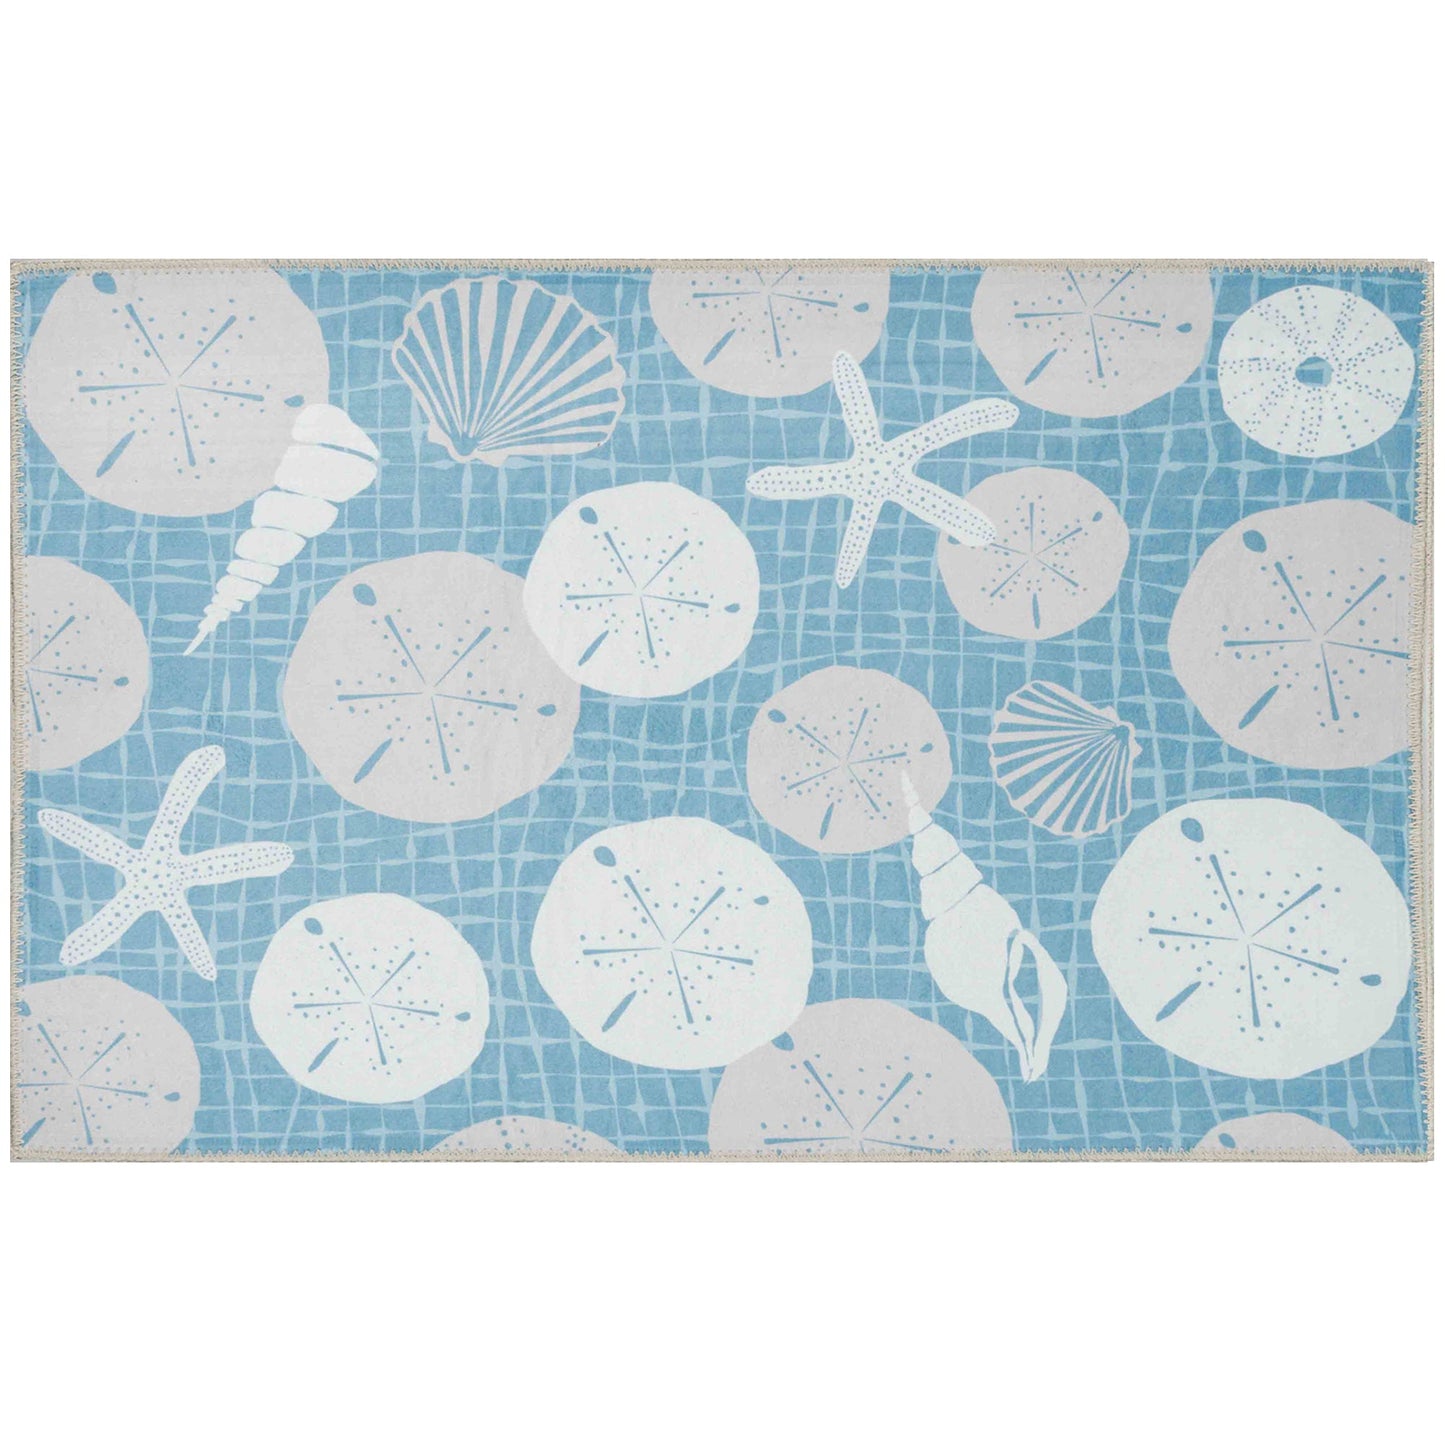 Netted Sand Dollars and Shells Olivia's Home Accent Rug Coastal Washable Rug 22" x 32"